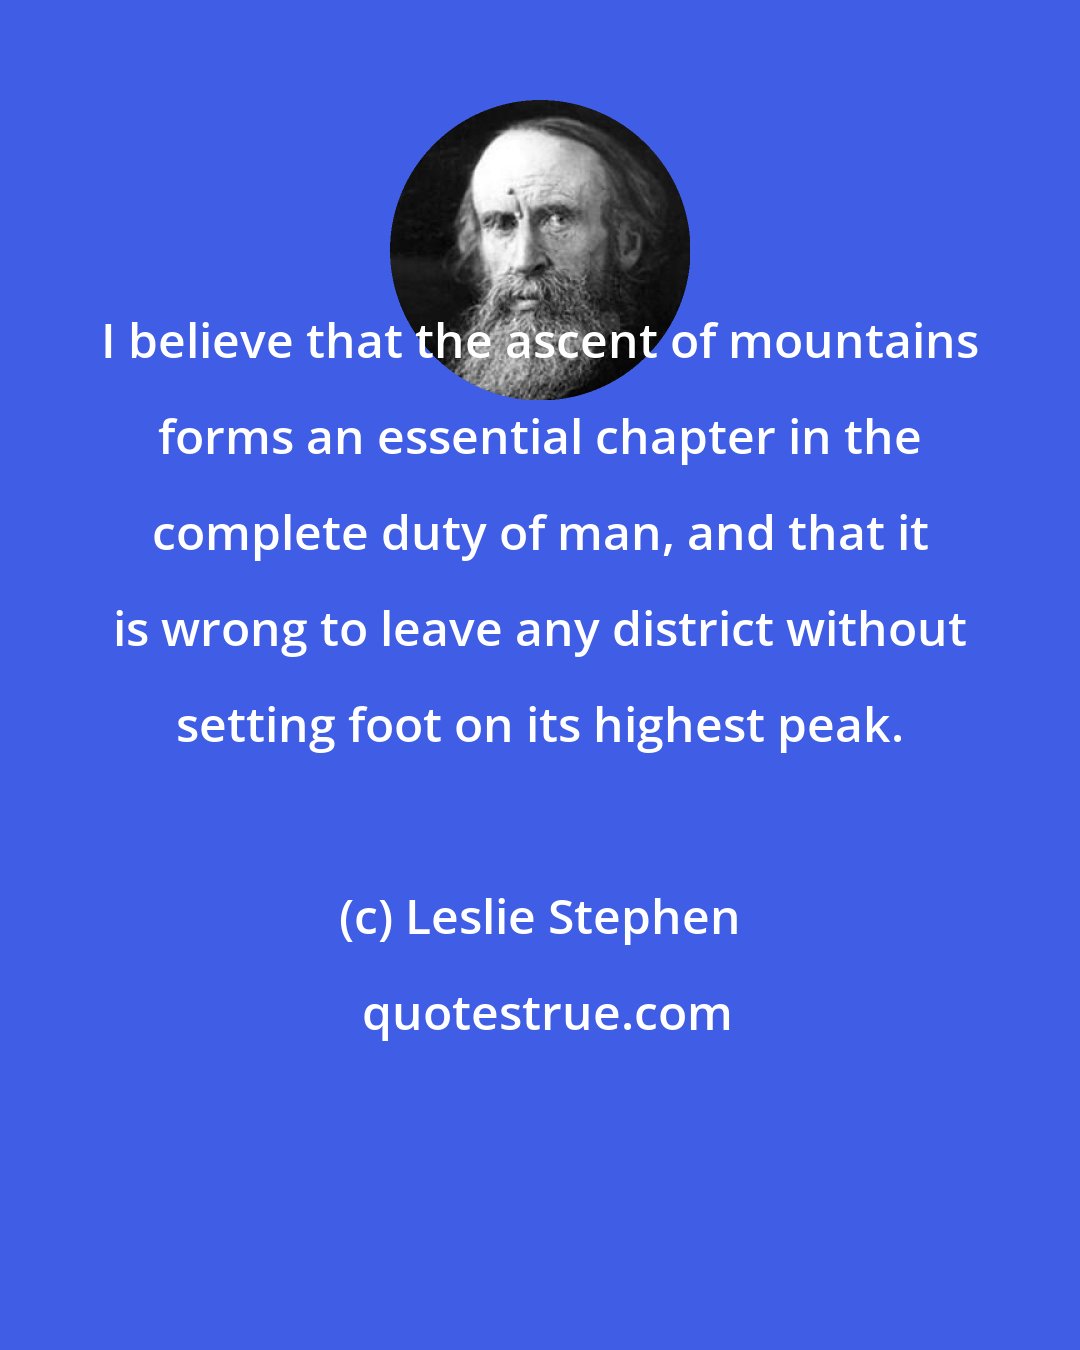 Leslie Stephen: I believe that the ascent of mountains forms an essential chapter in the complete duty of man, and that it is wrong to leave any district without setting foot on its highest peak.